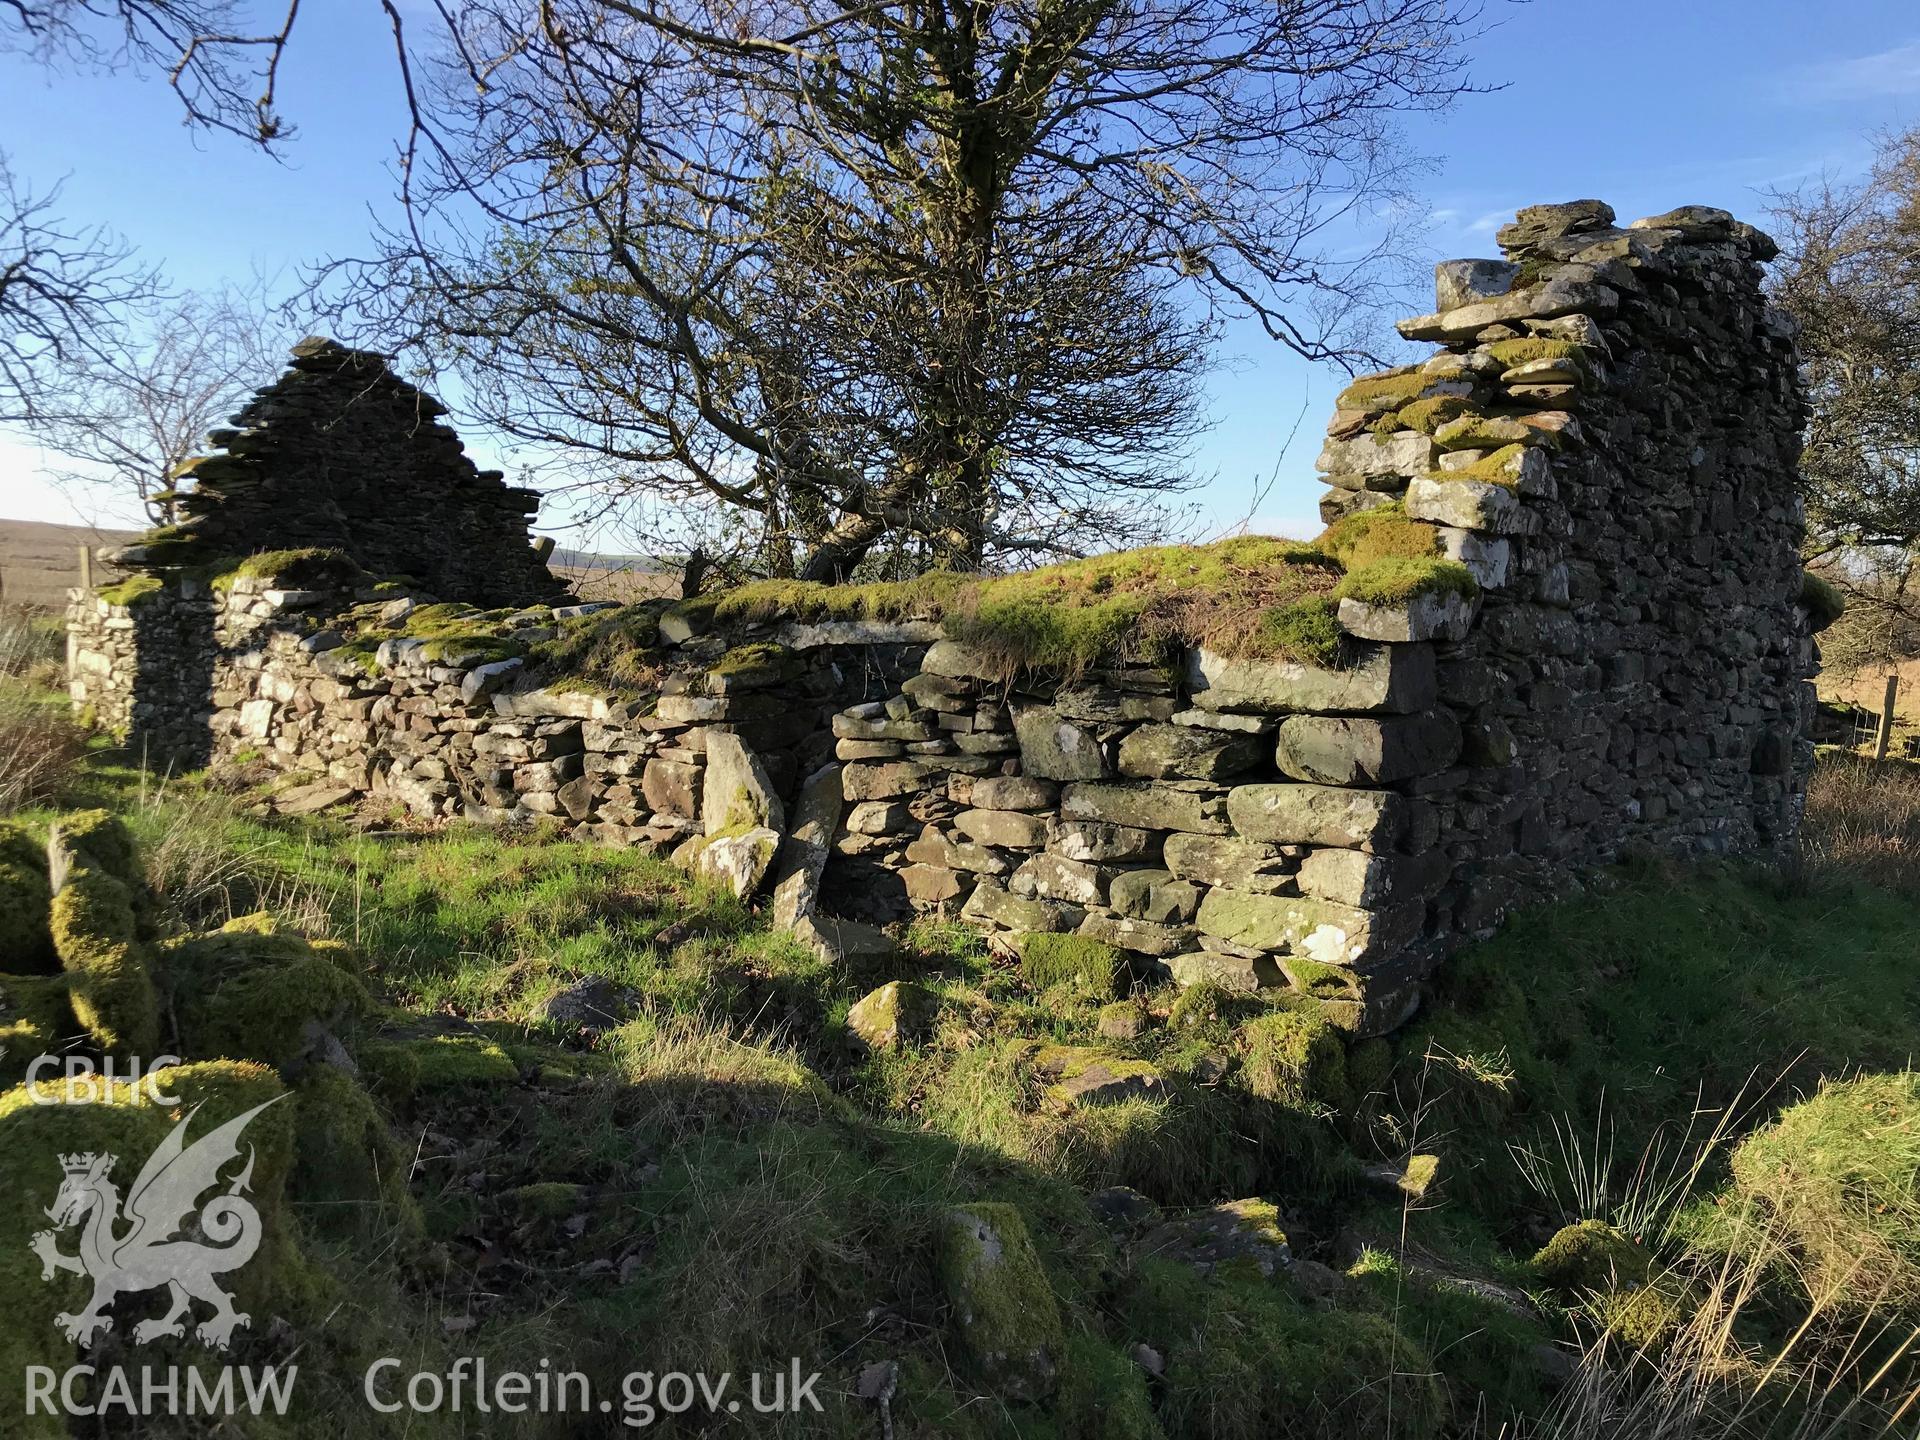 Exterior view of a stone cottage north west of the ruined Castell, which is south west of Bryneithinog farm, Ystrad Fflur. Colour photograph taken by Paul R. Davis on 18th November 2018.